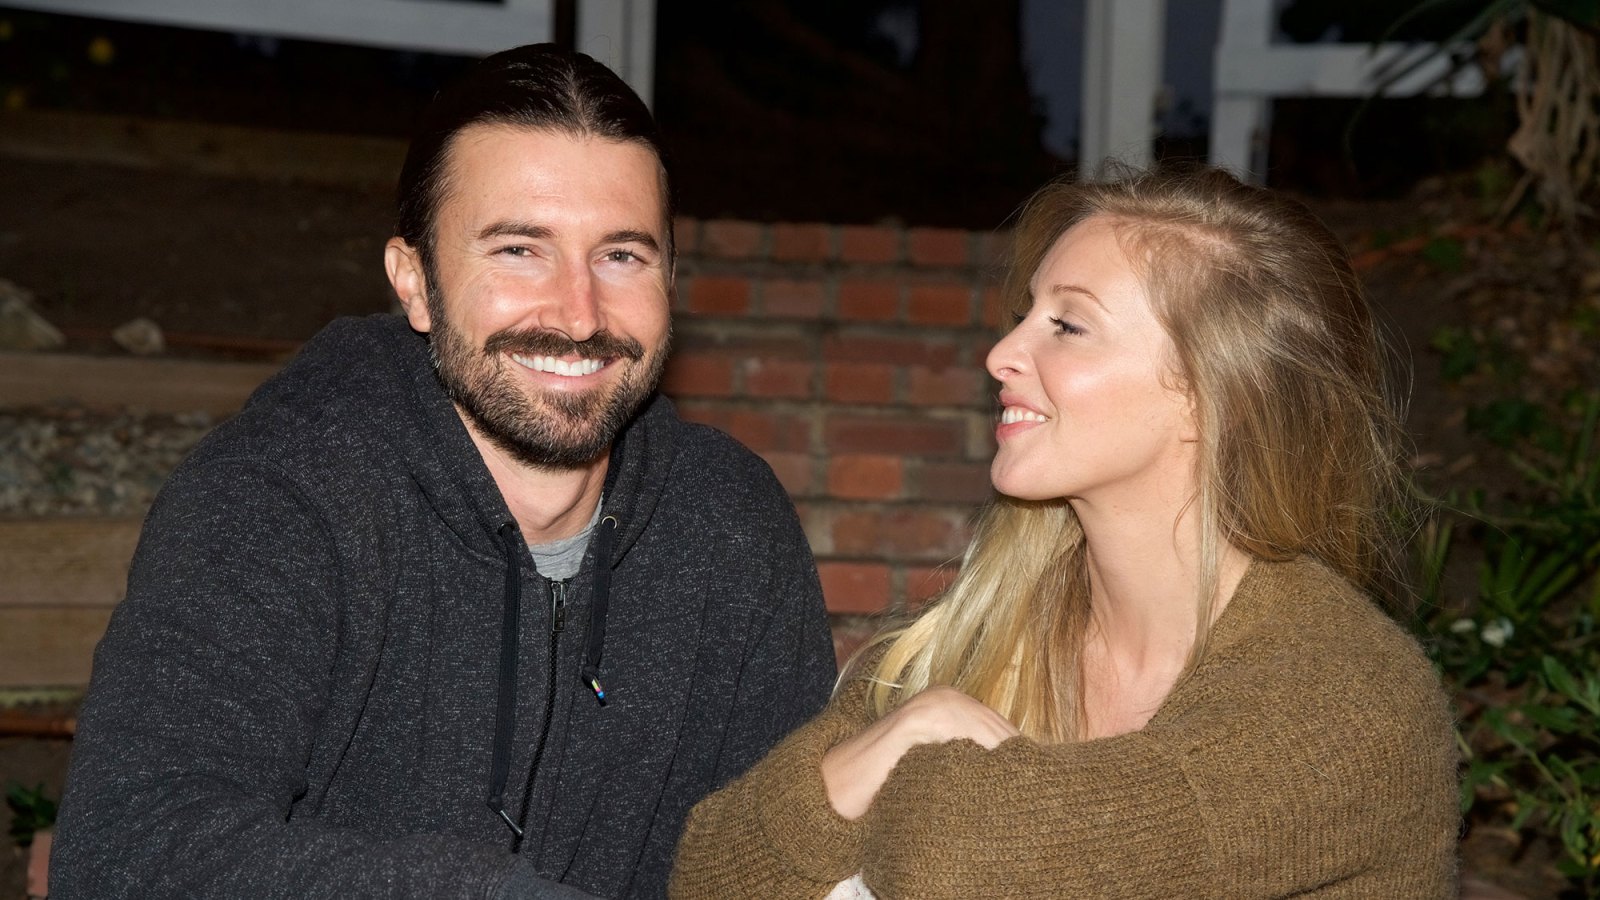 Brandon Jenner ‘absolutely Wants To Remarry After Leah Jenner Split